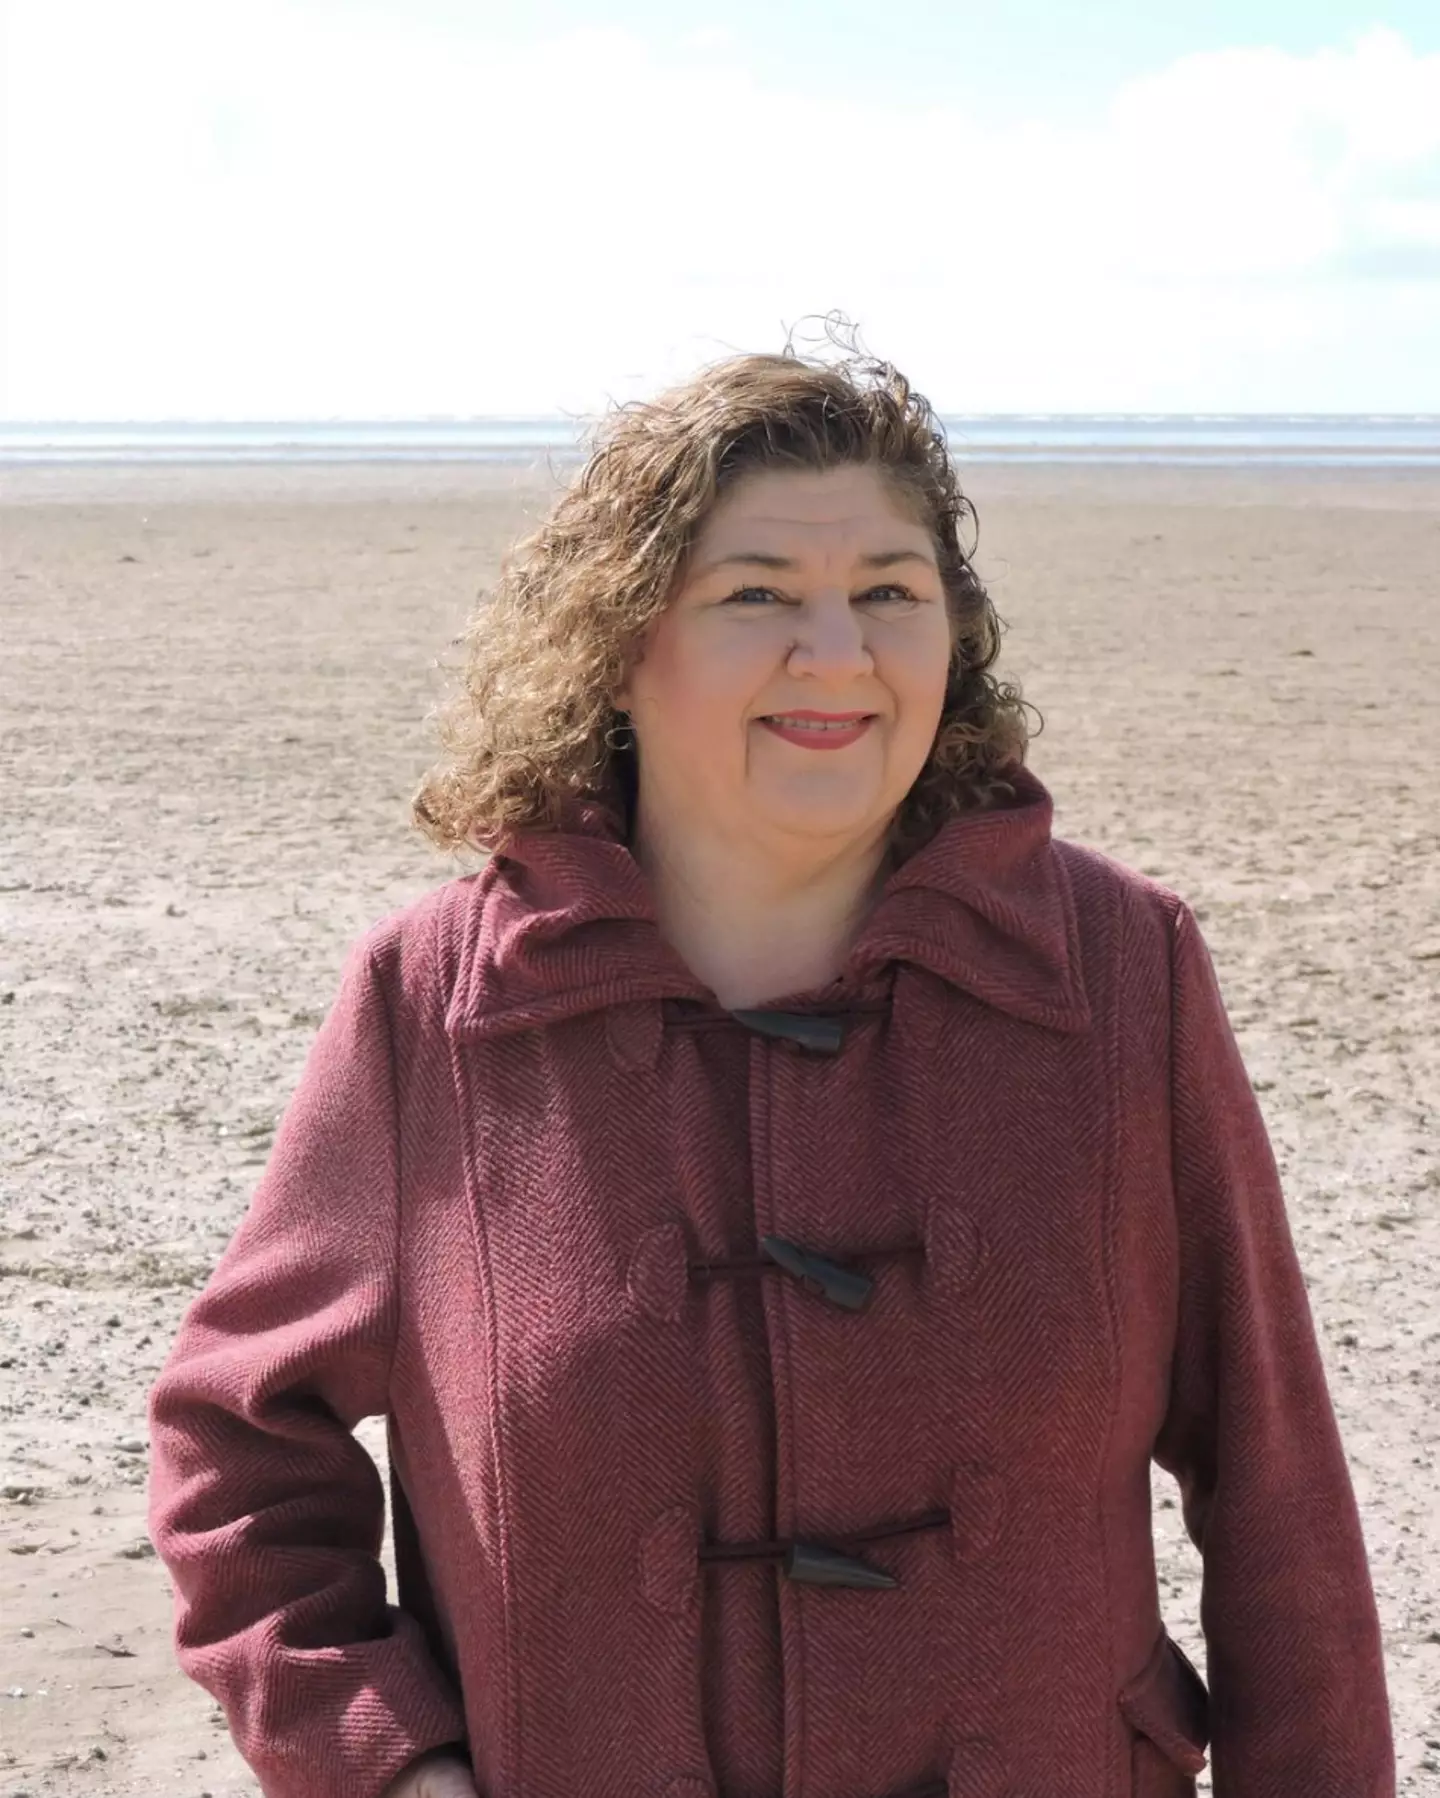 Cheryl Fergison was diagnosed with womb cancer back in 2015. (Instagram/@cherylfergison1)